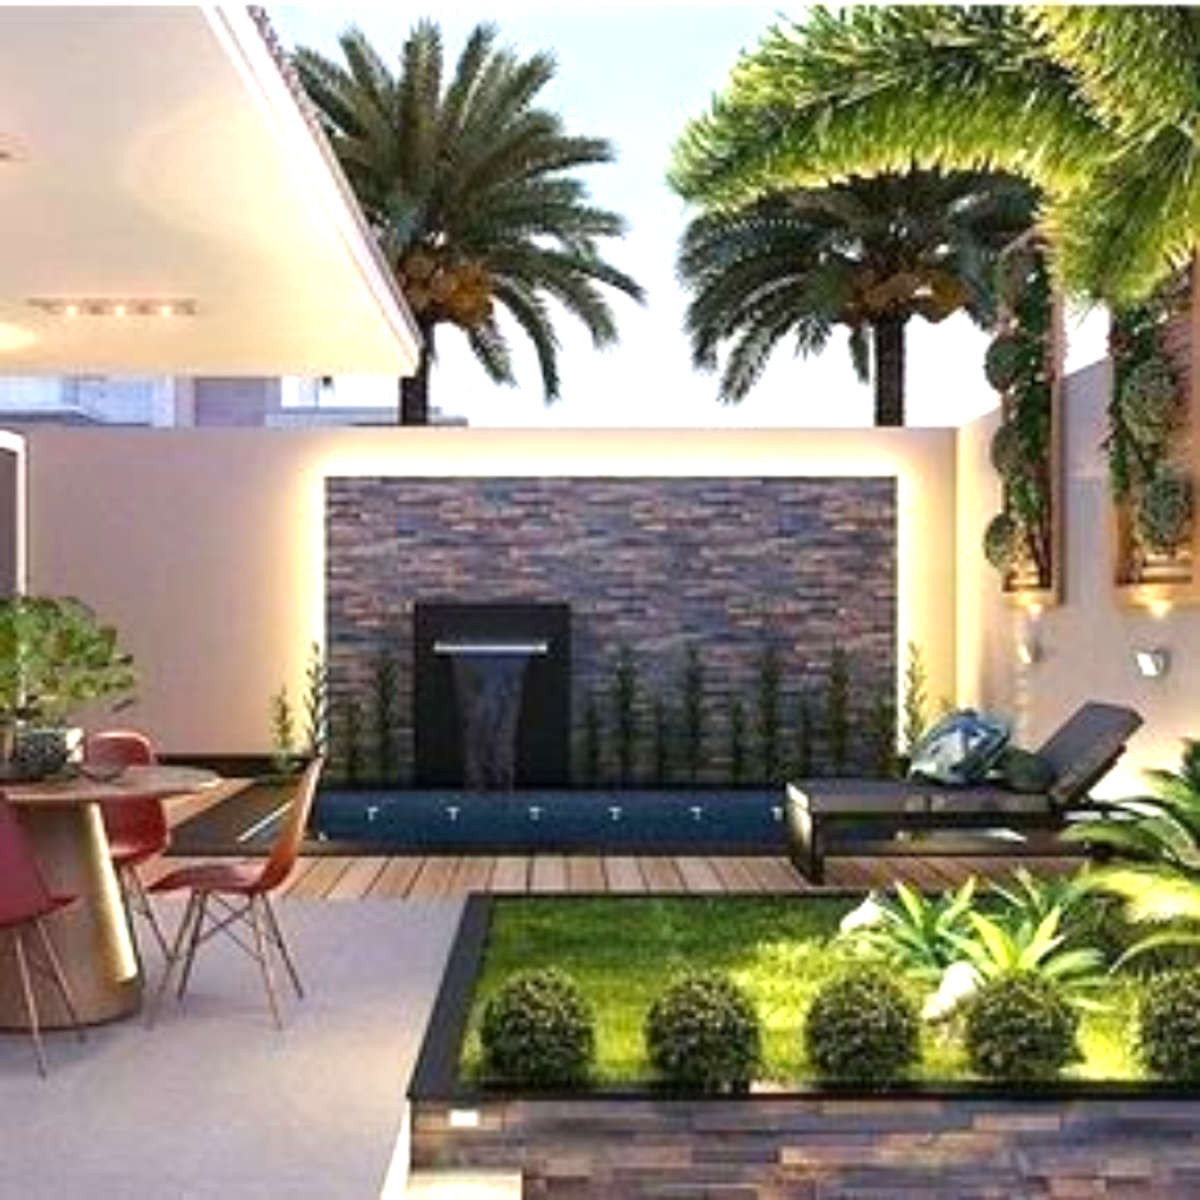 If you think good design is expensive you should look at the cost of bad design 

#Lawn #lawngarden #outdoorBellJetFountain #Landscape #LandscapeGarden #architecturedesigns  . #Architectural&Interior #3Dvisualization